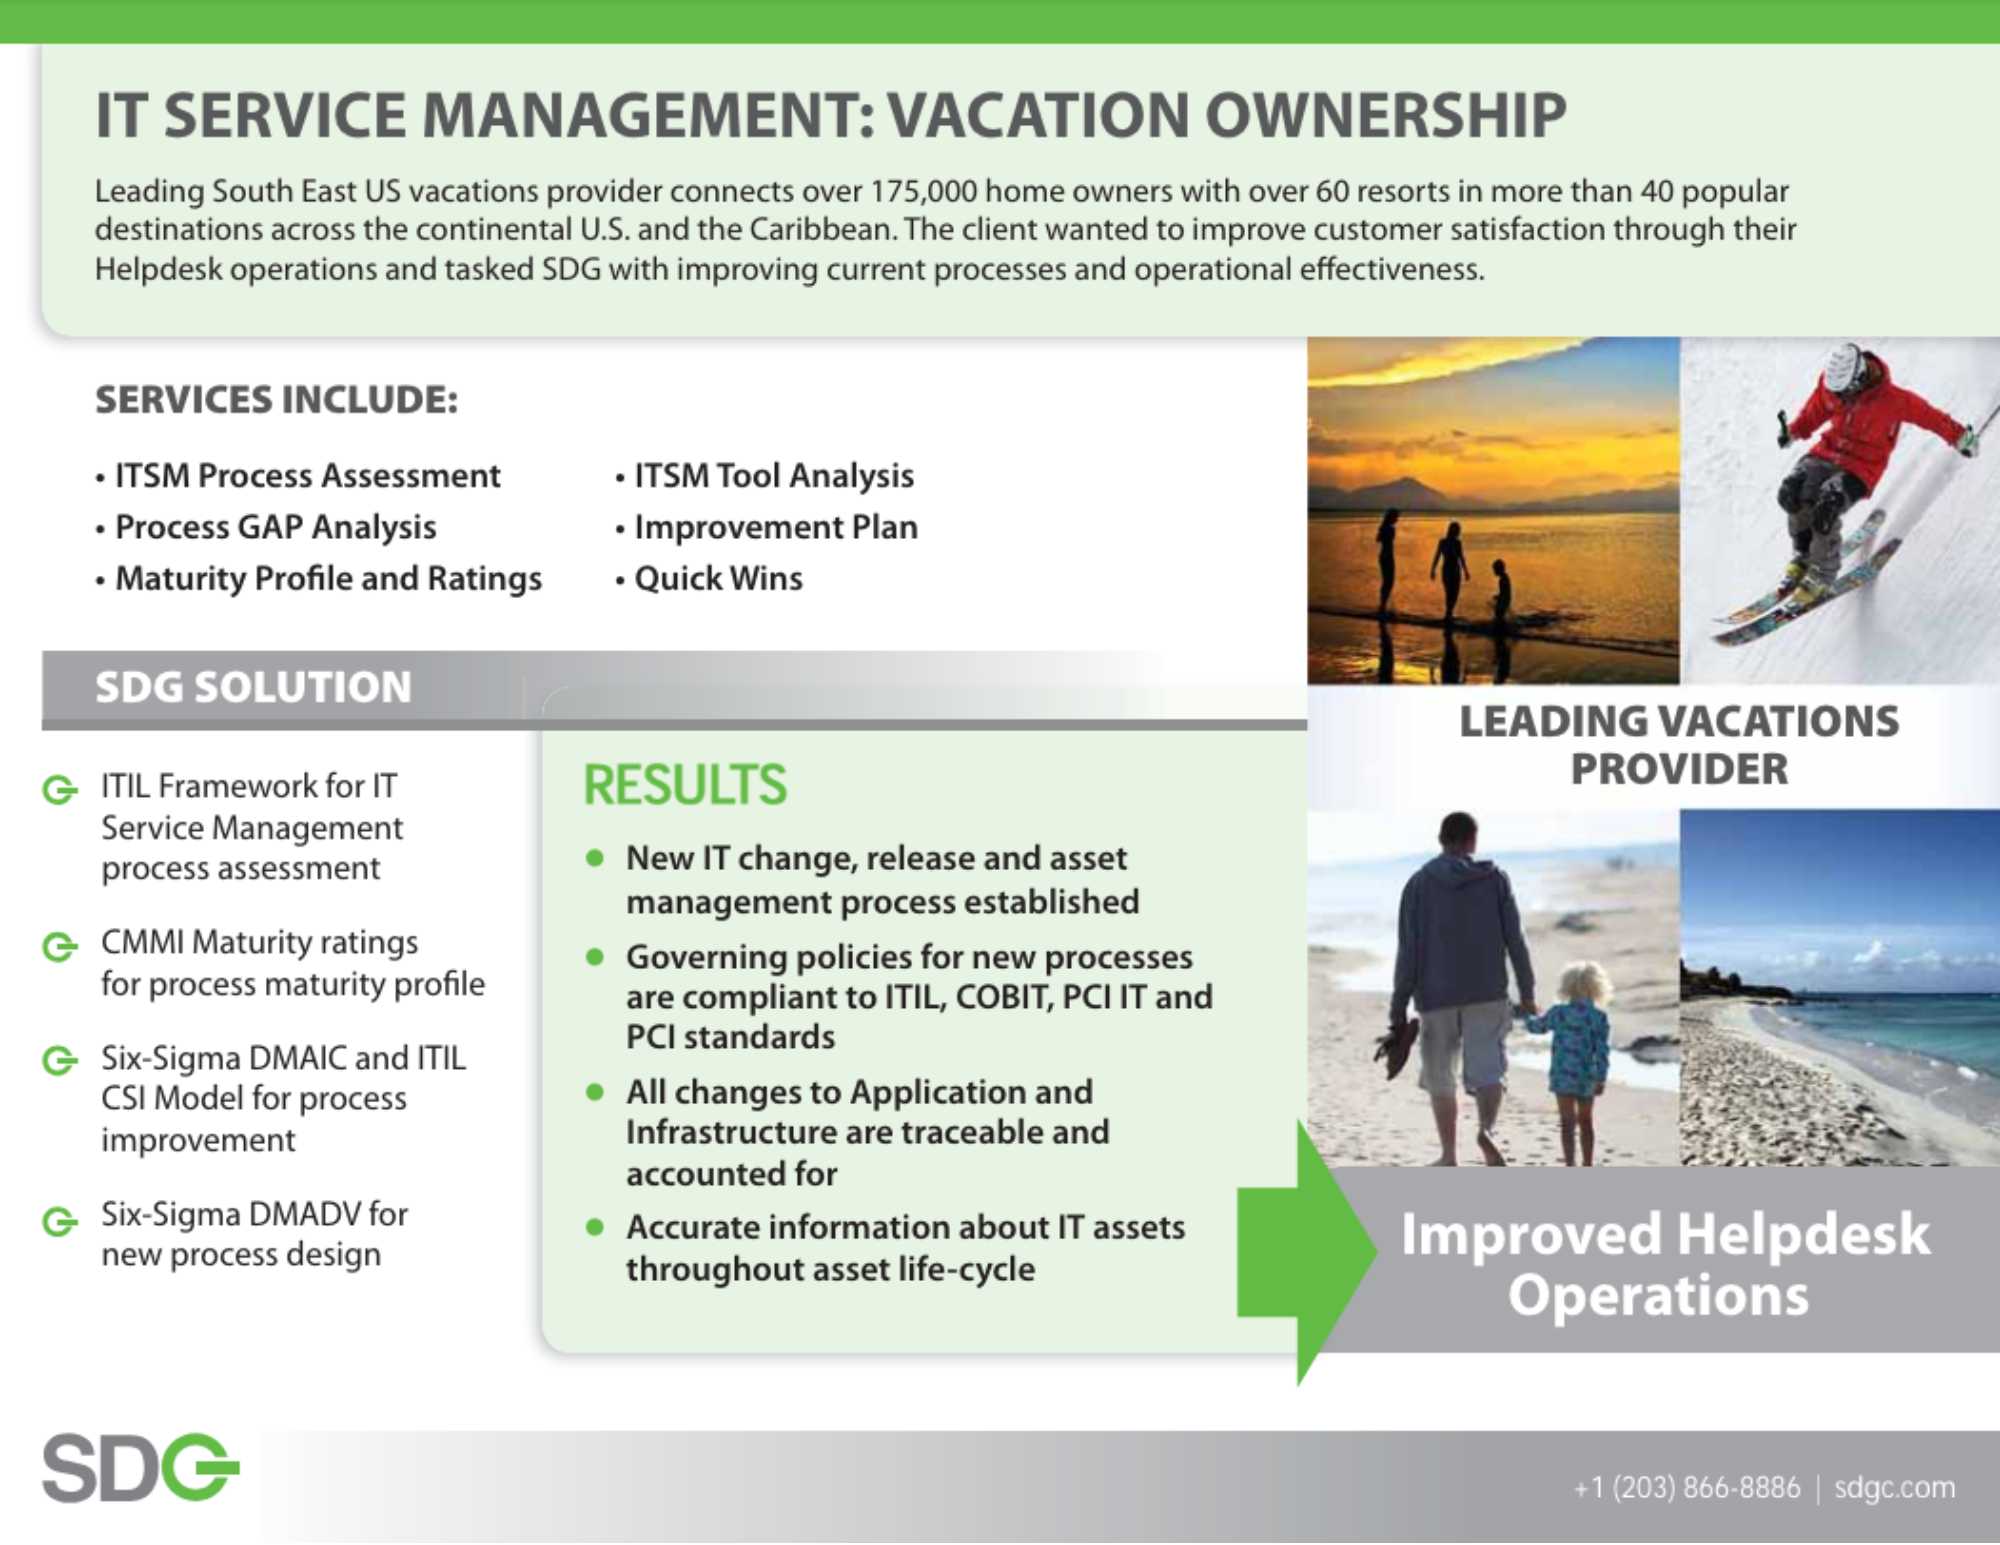 ITSM Vacation Ownership Case Study Image